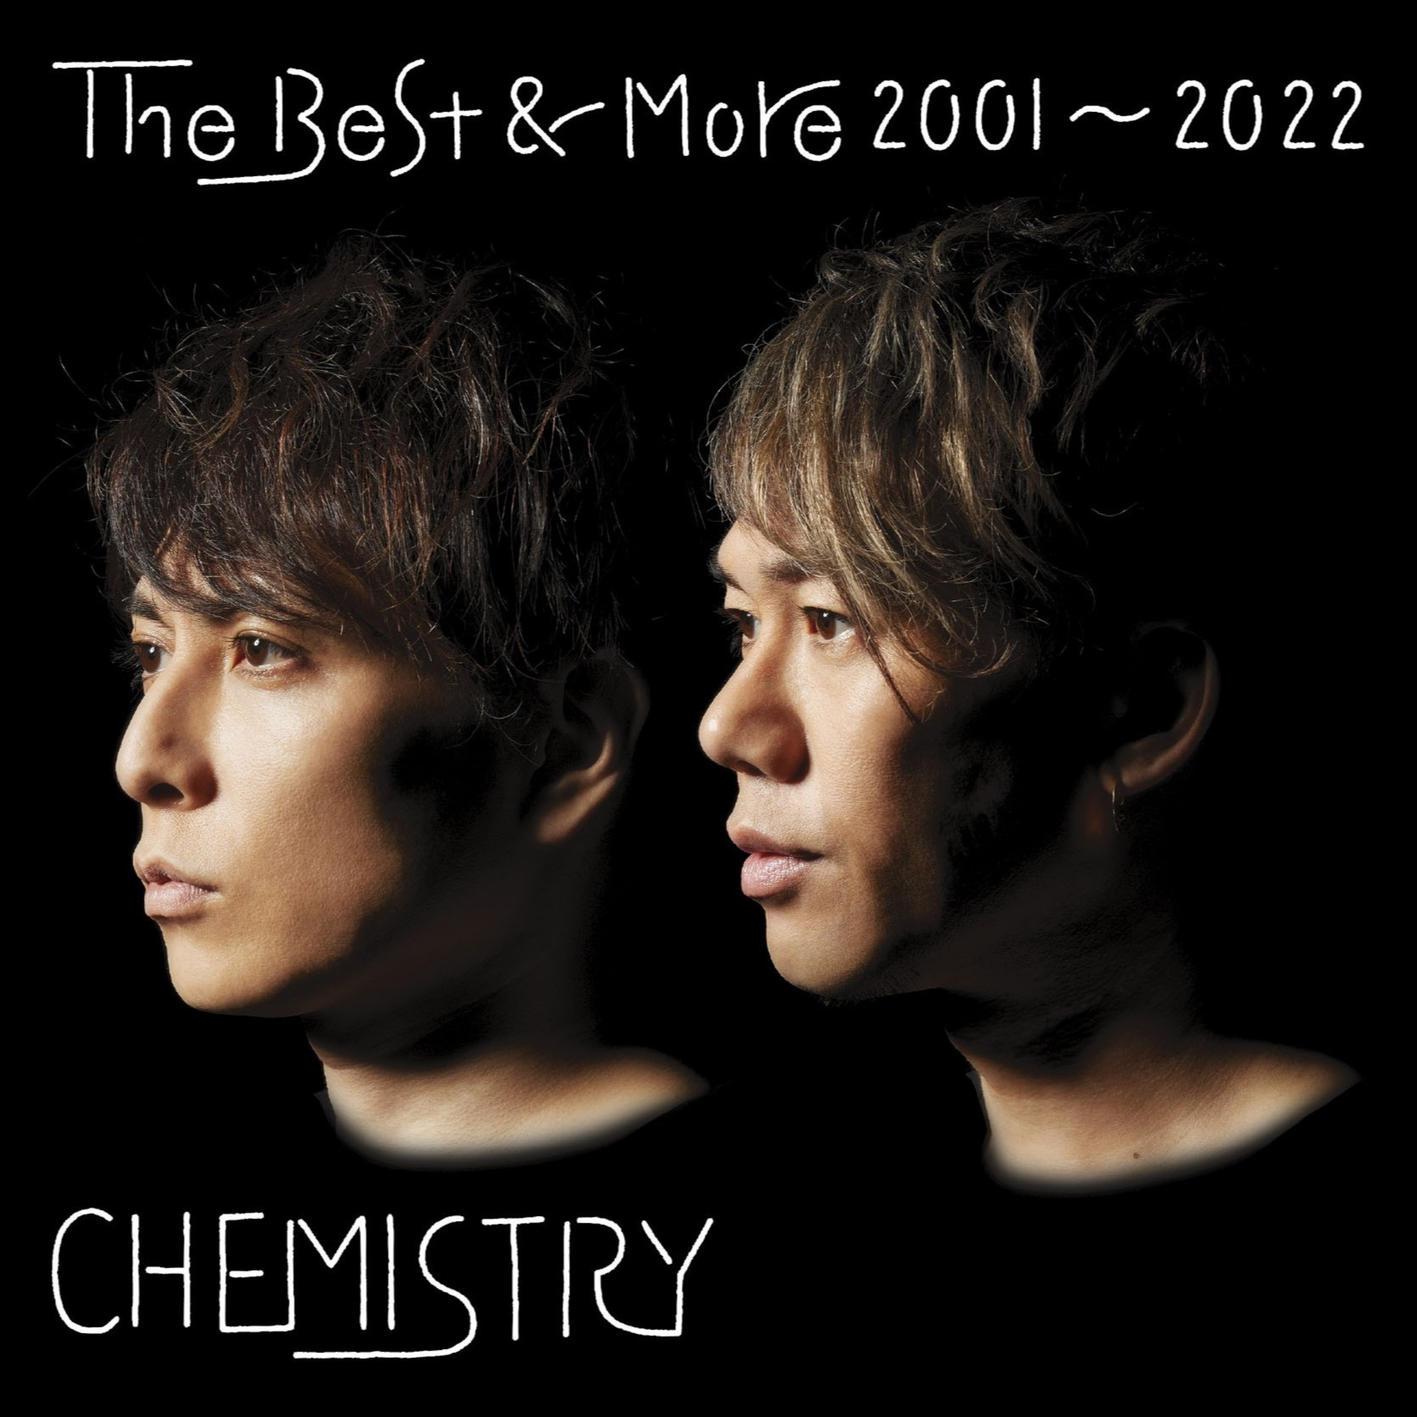 The Best  More 2001 2022